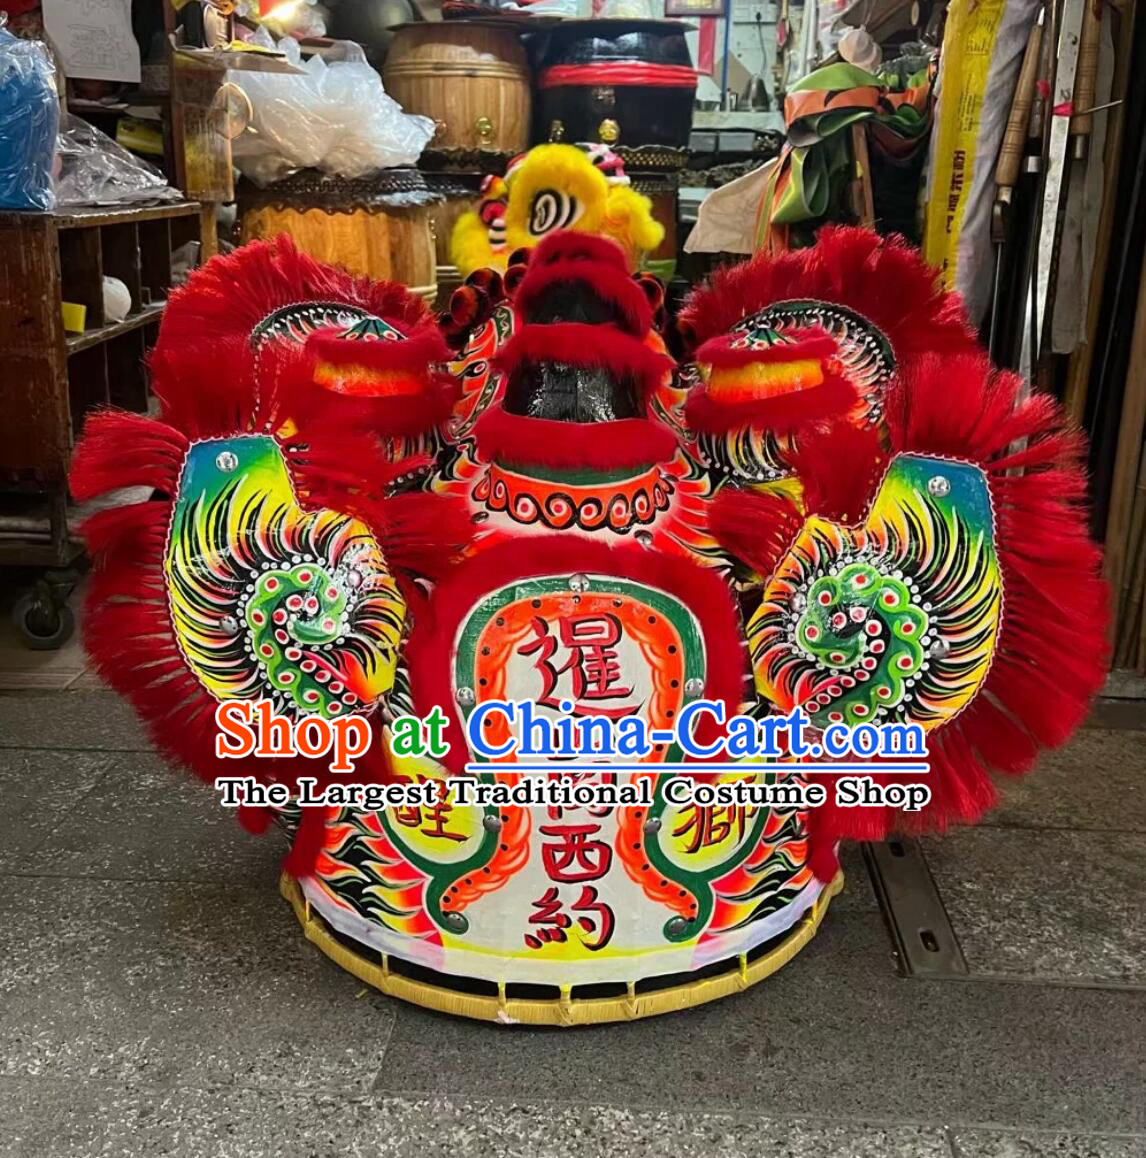 Traditional Handmade Red Lion Costume China Fut San Dancing Lion Chinese Happy New Year Lion Dance Equipment Online Shop